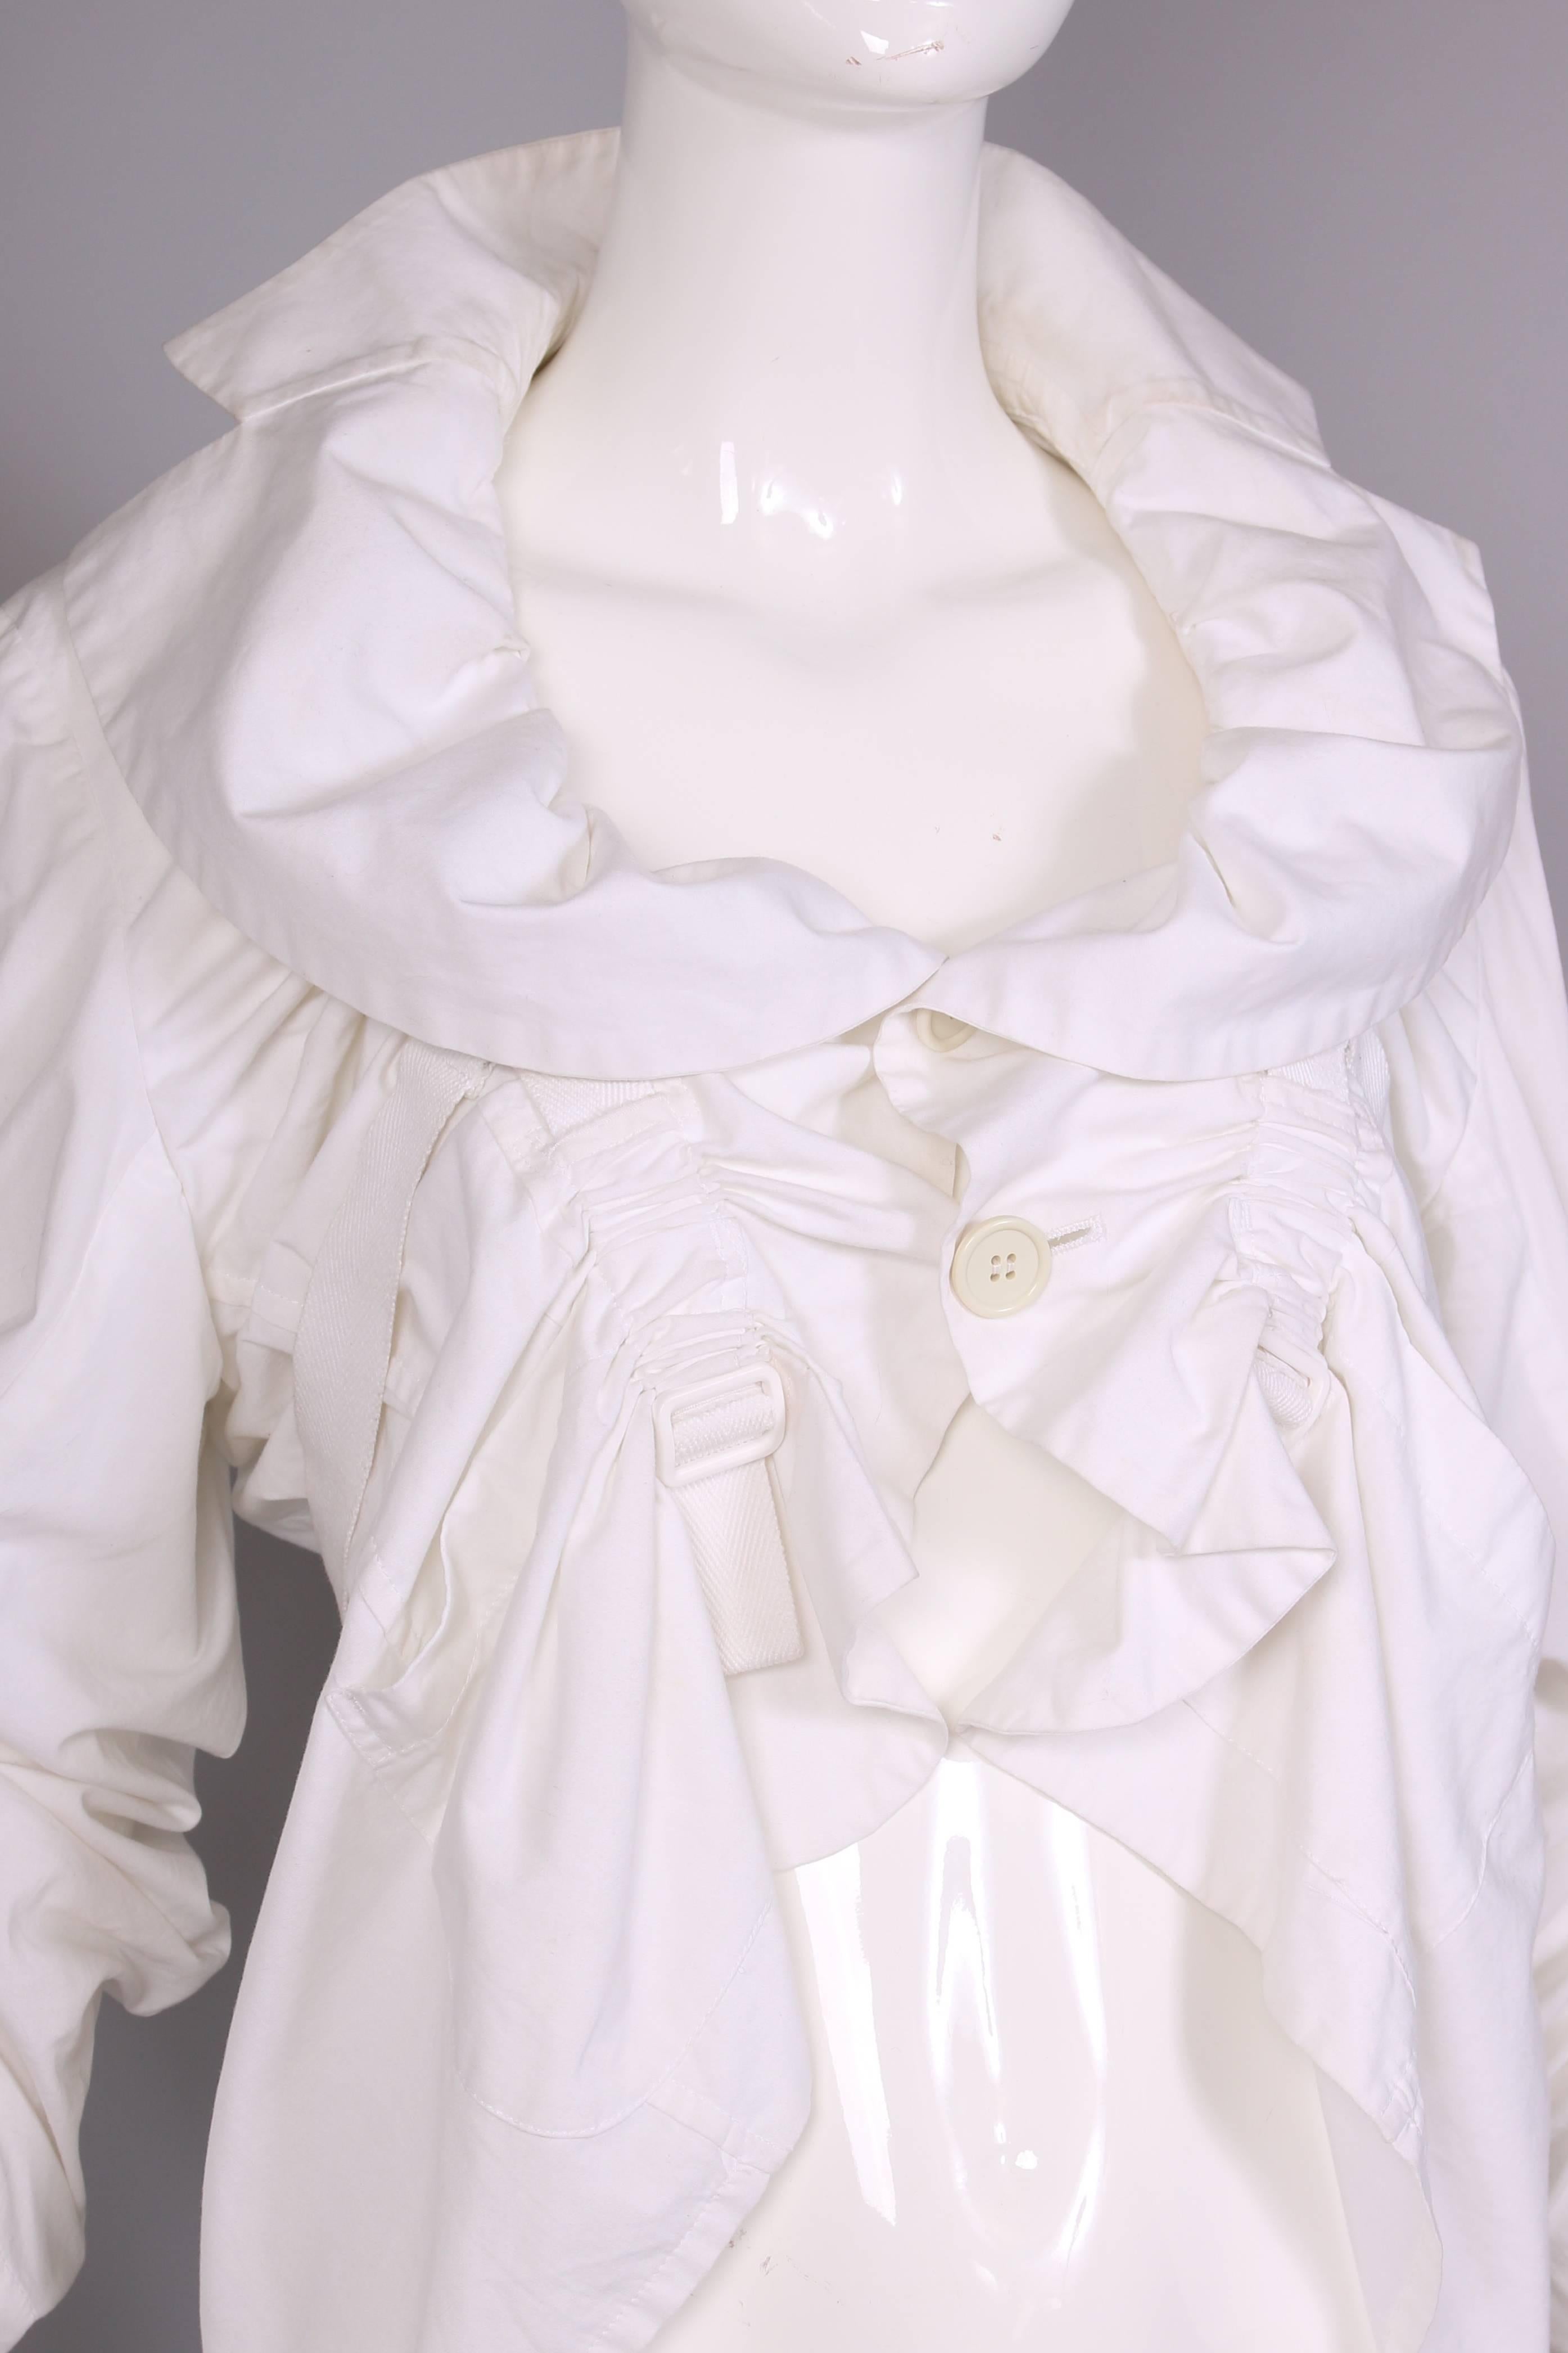 2002 Junya Watanabe for Comme Des Garcons Ruched White Cotton Ruffle Top  1